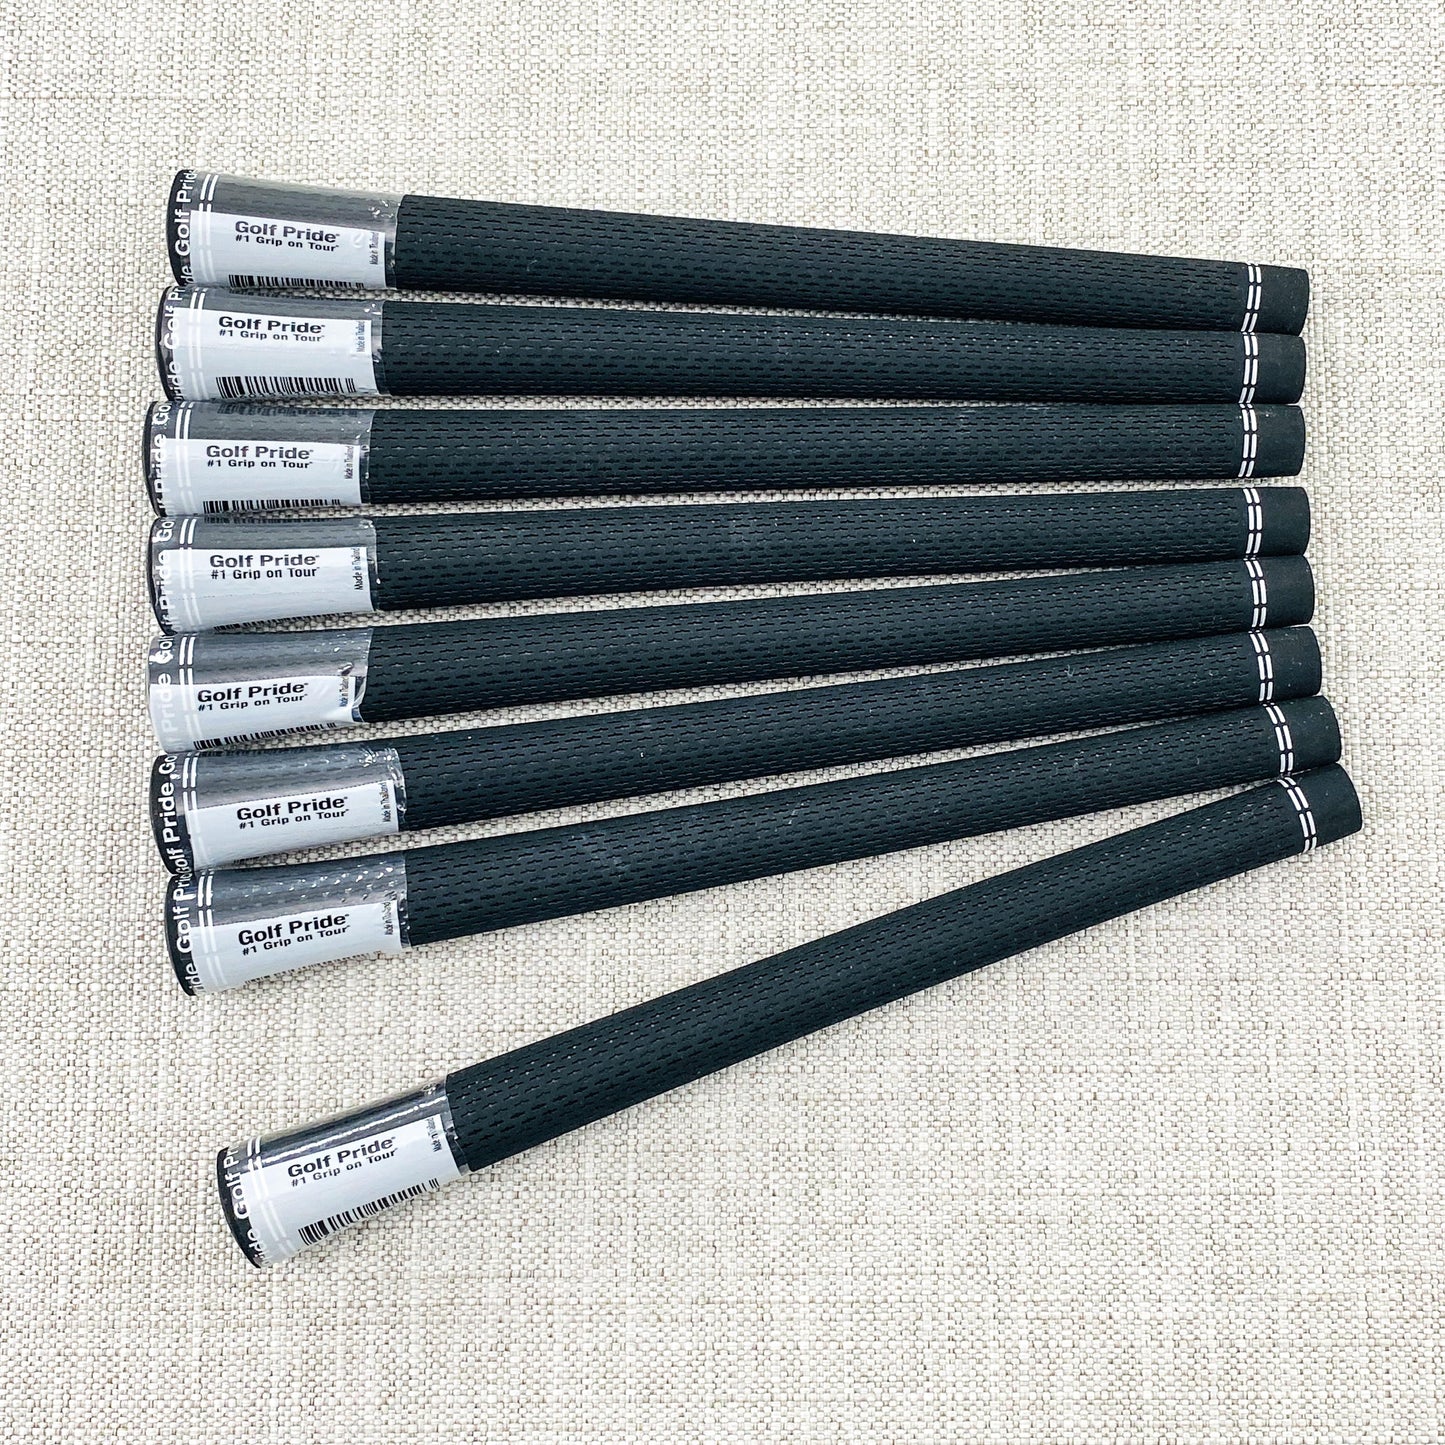 Golf Pride Tour Velvet 360 swing grip. Choice of size. Black/White - Price includes fitment.